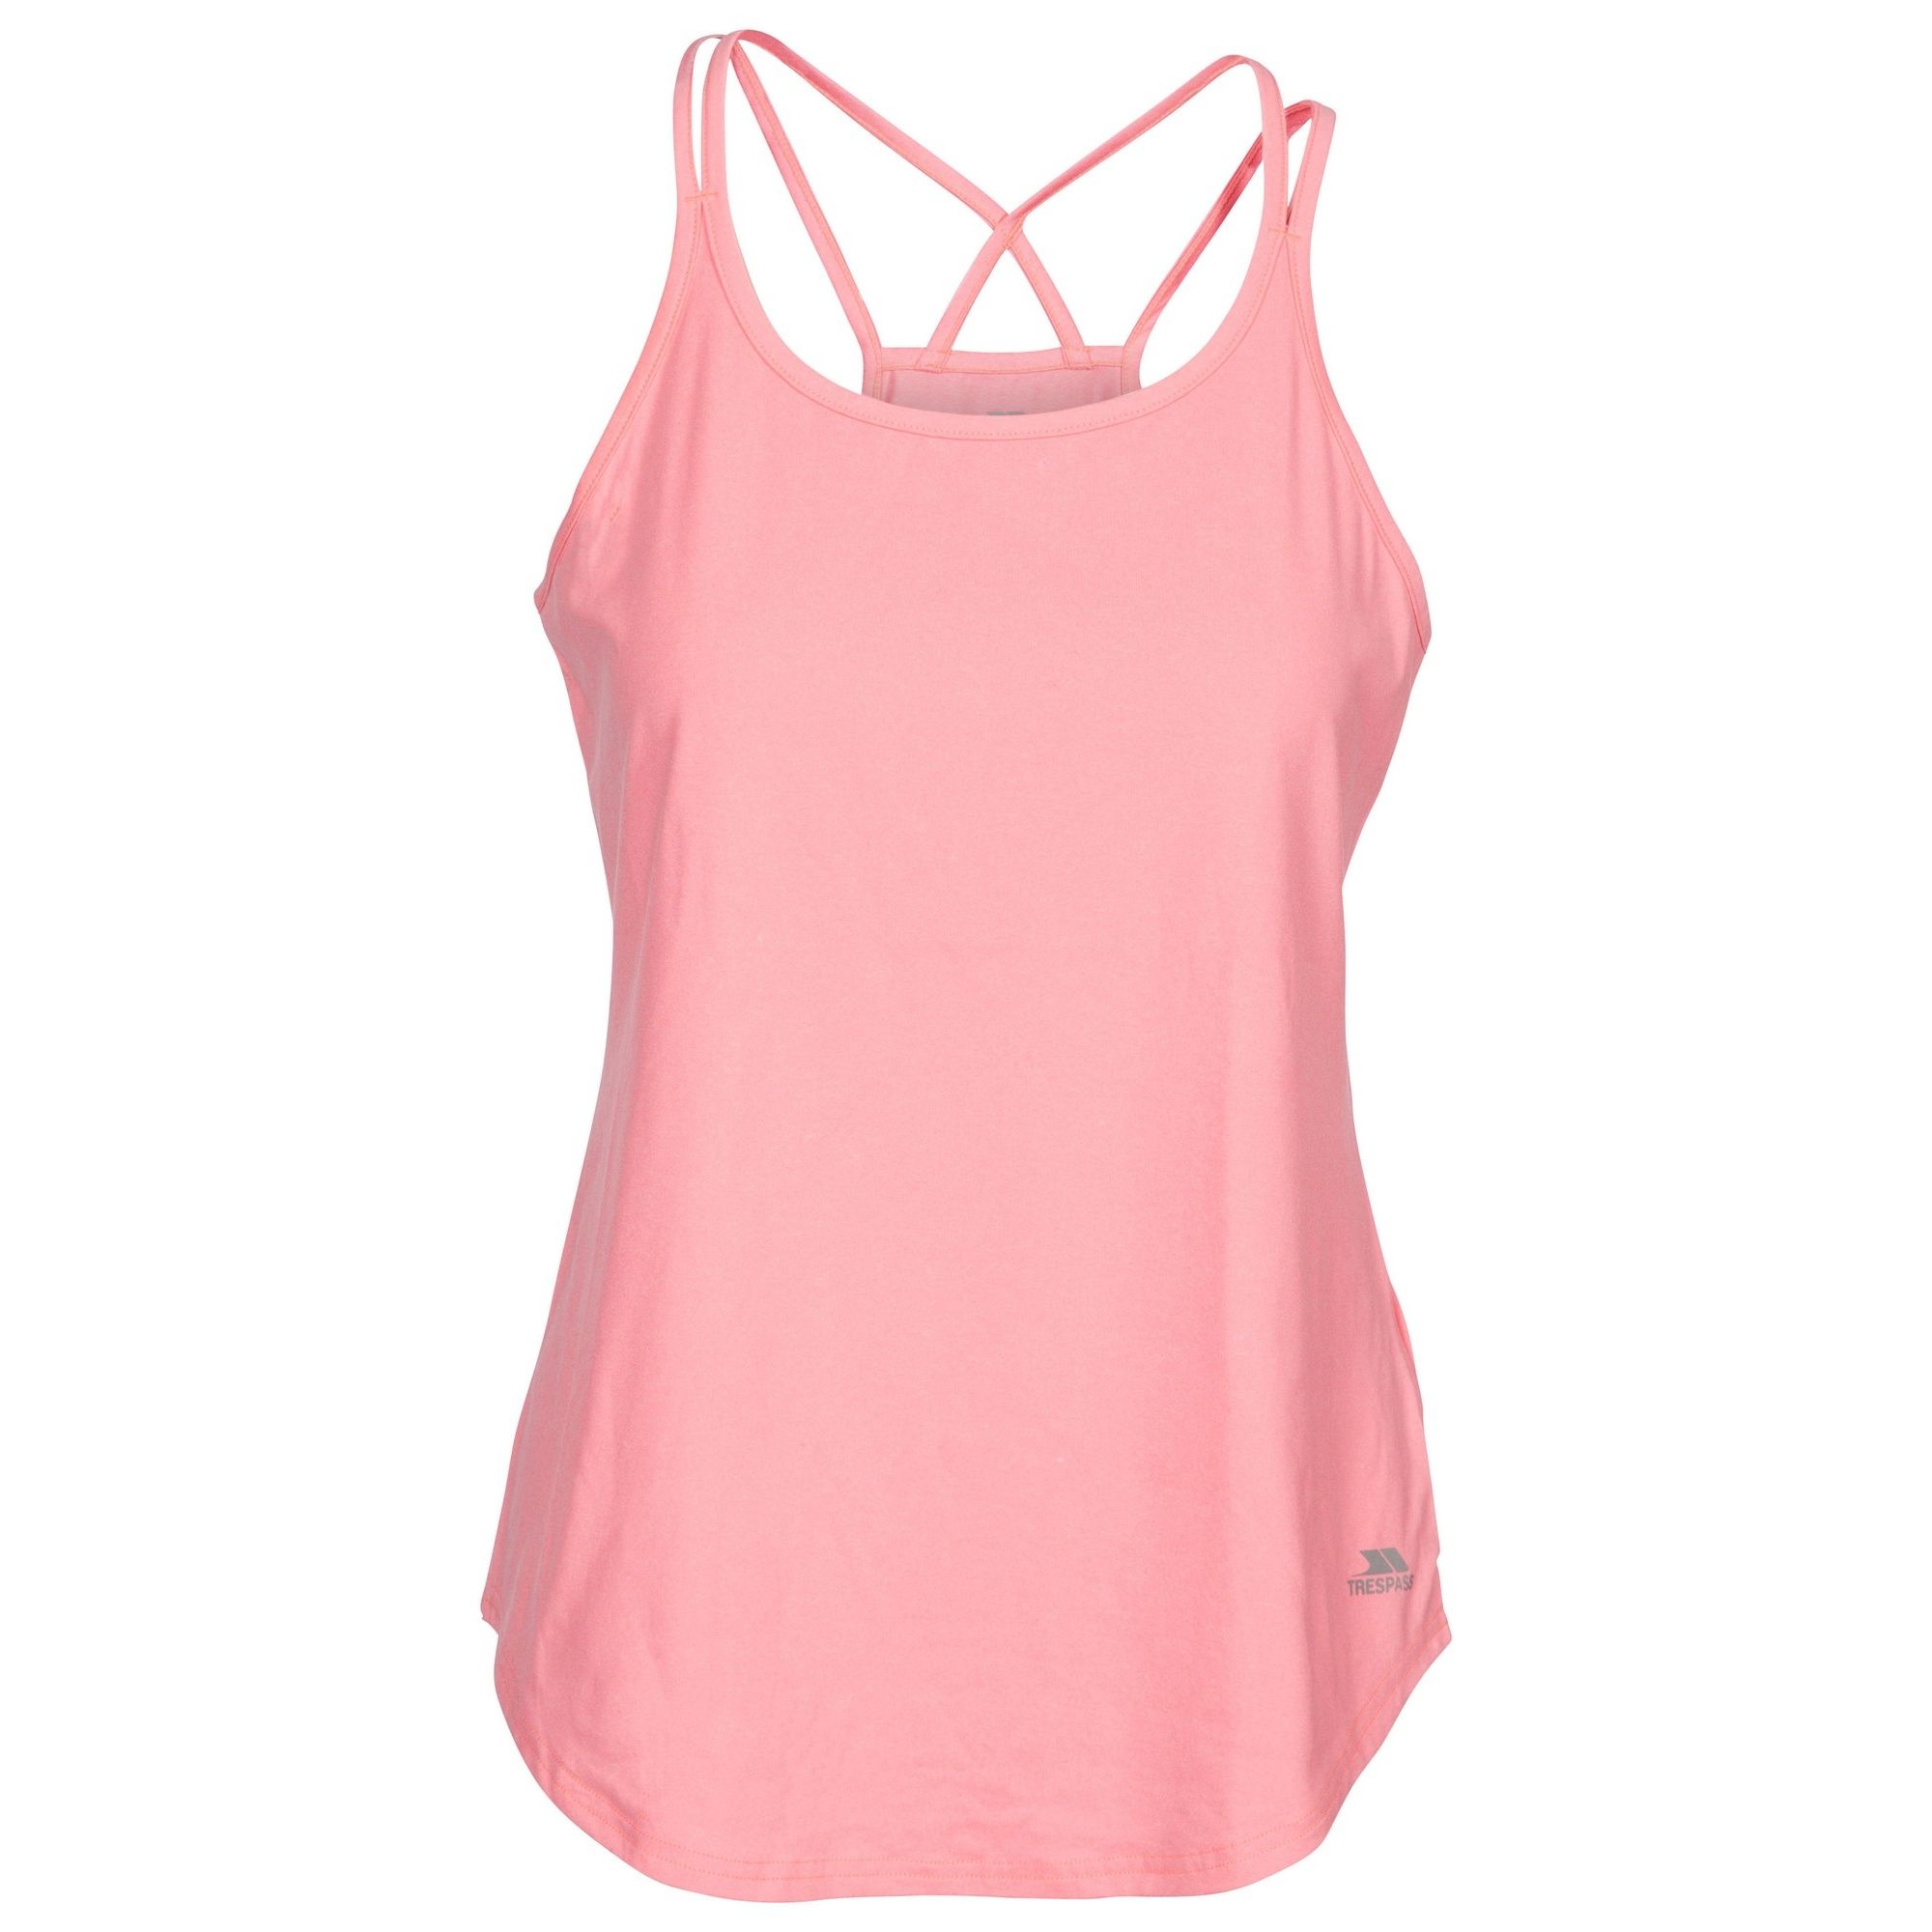 Vest top. Round neck. Double strap detail with crossover back. Reflective printed logos. Wicking. Quick dry. 92% Polyester, 8% Elastane. Trespass Womens Chest Sizing (approx): XS/8 - 32in/81cm, S/10 - 34in/86cm, M/12 - 36in/91.4cm, L/14 - 38in/96.5cm, XL/16 - 40in/101.5cm, XXL/18 - 42in/106.5cm.